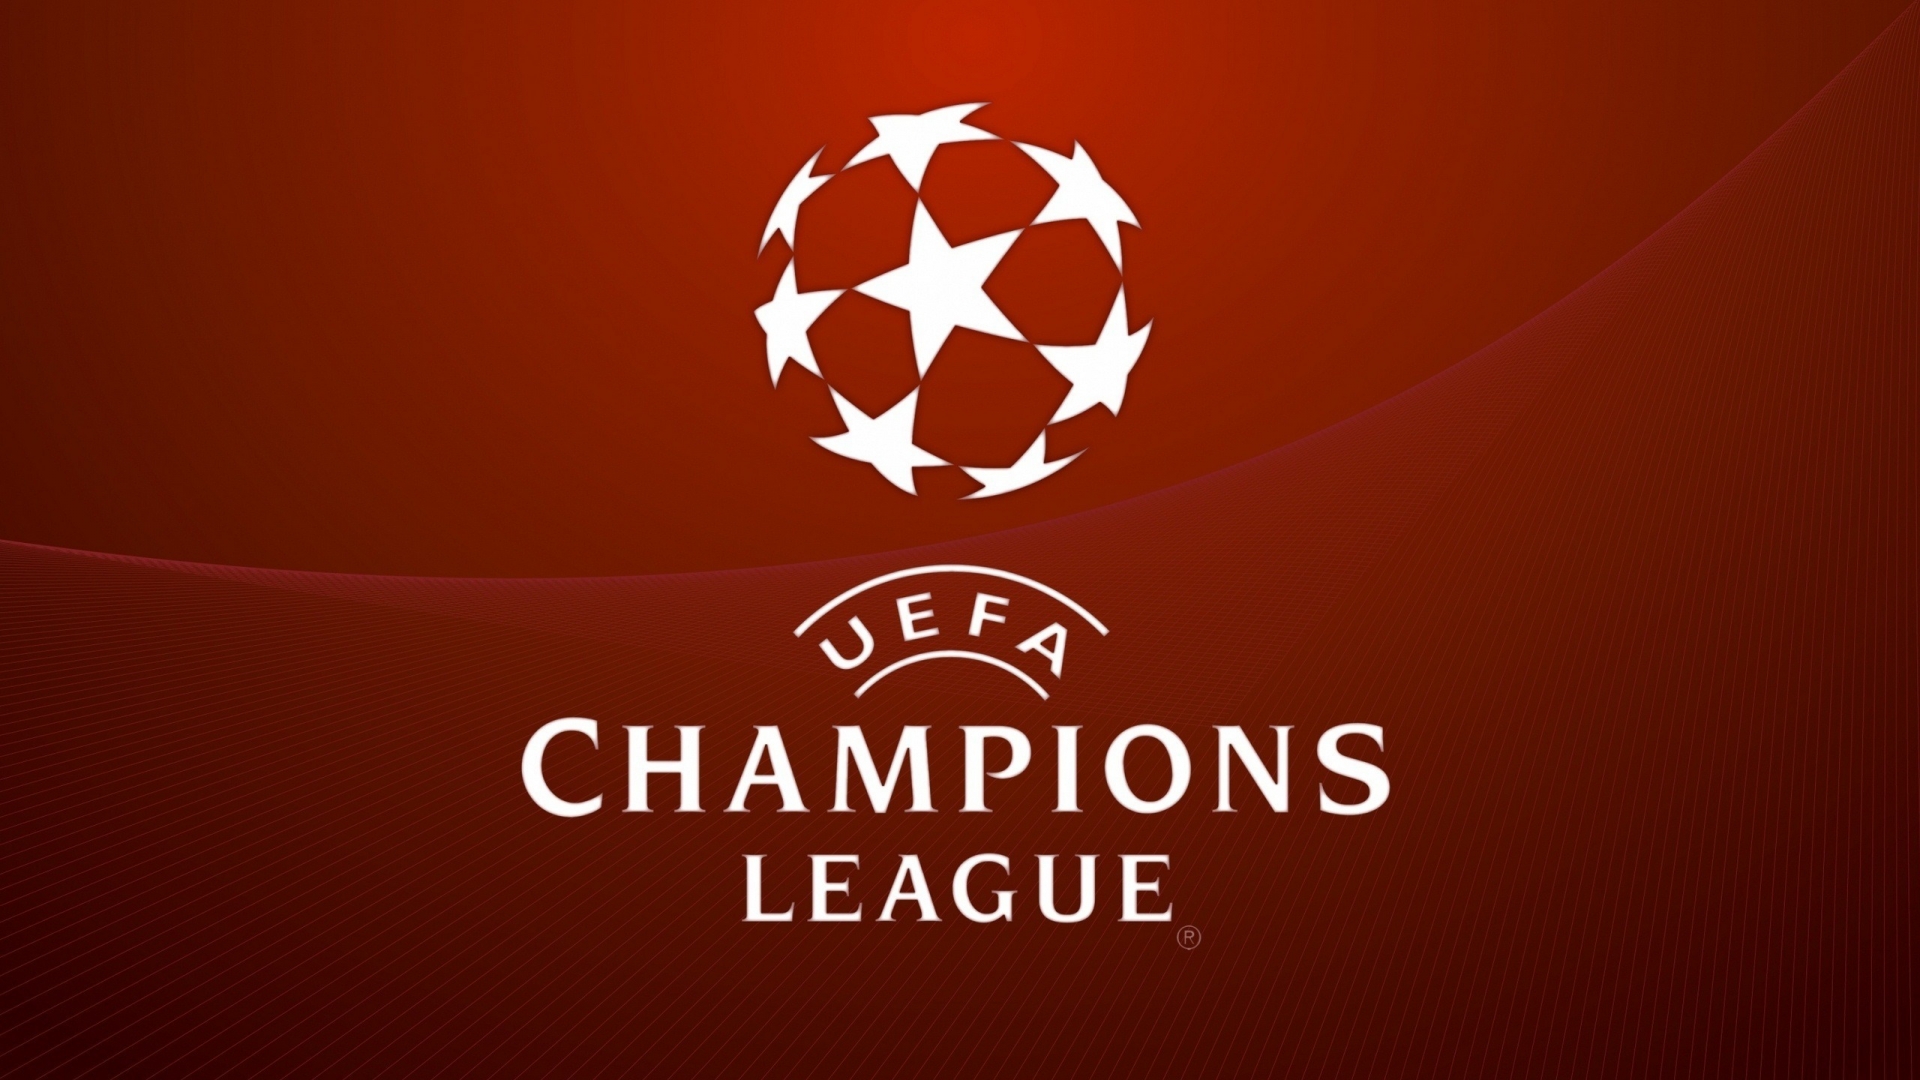 Champions League logo for 1920 x 1080 HDTV 1080p resolution